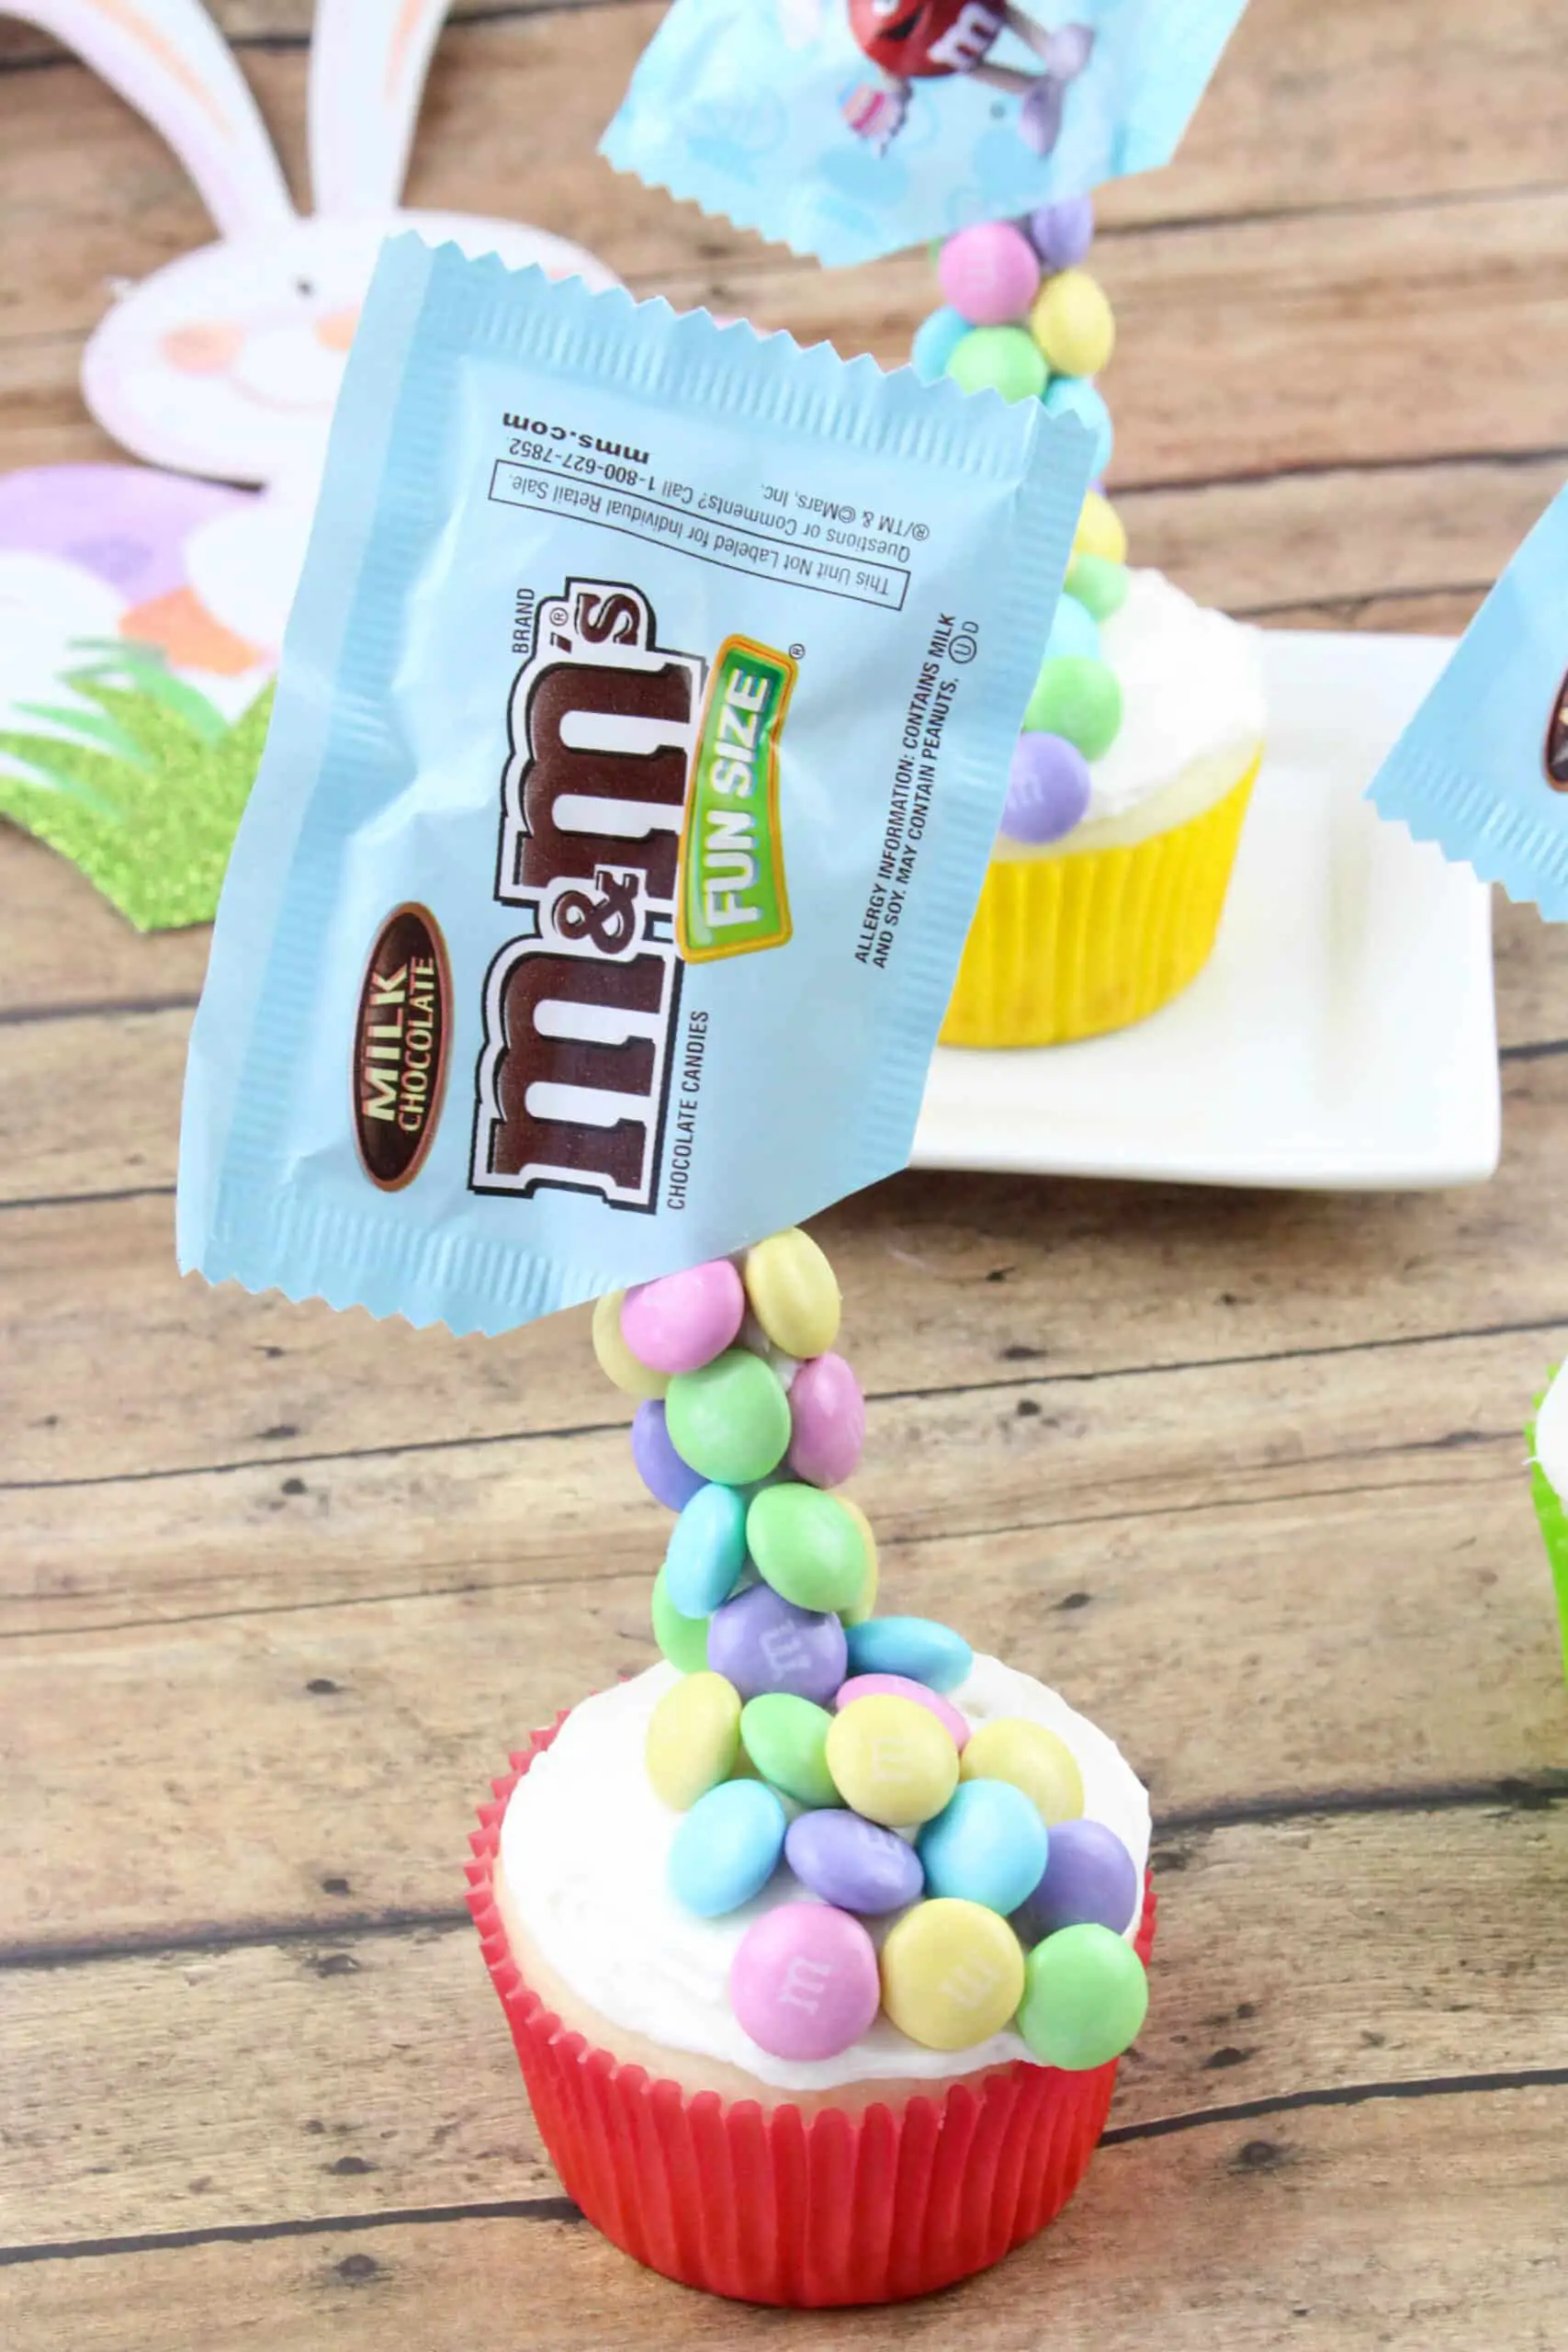 Learn How To Make Gravity Defying Cupcakes Just In Time For Easter